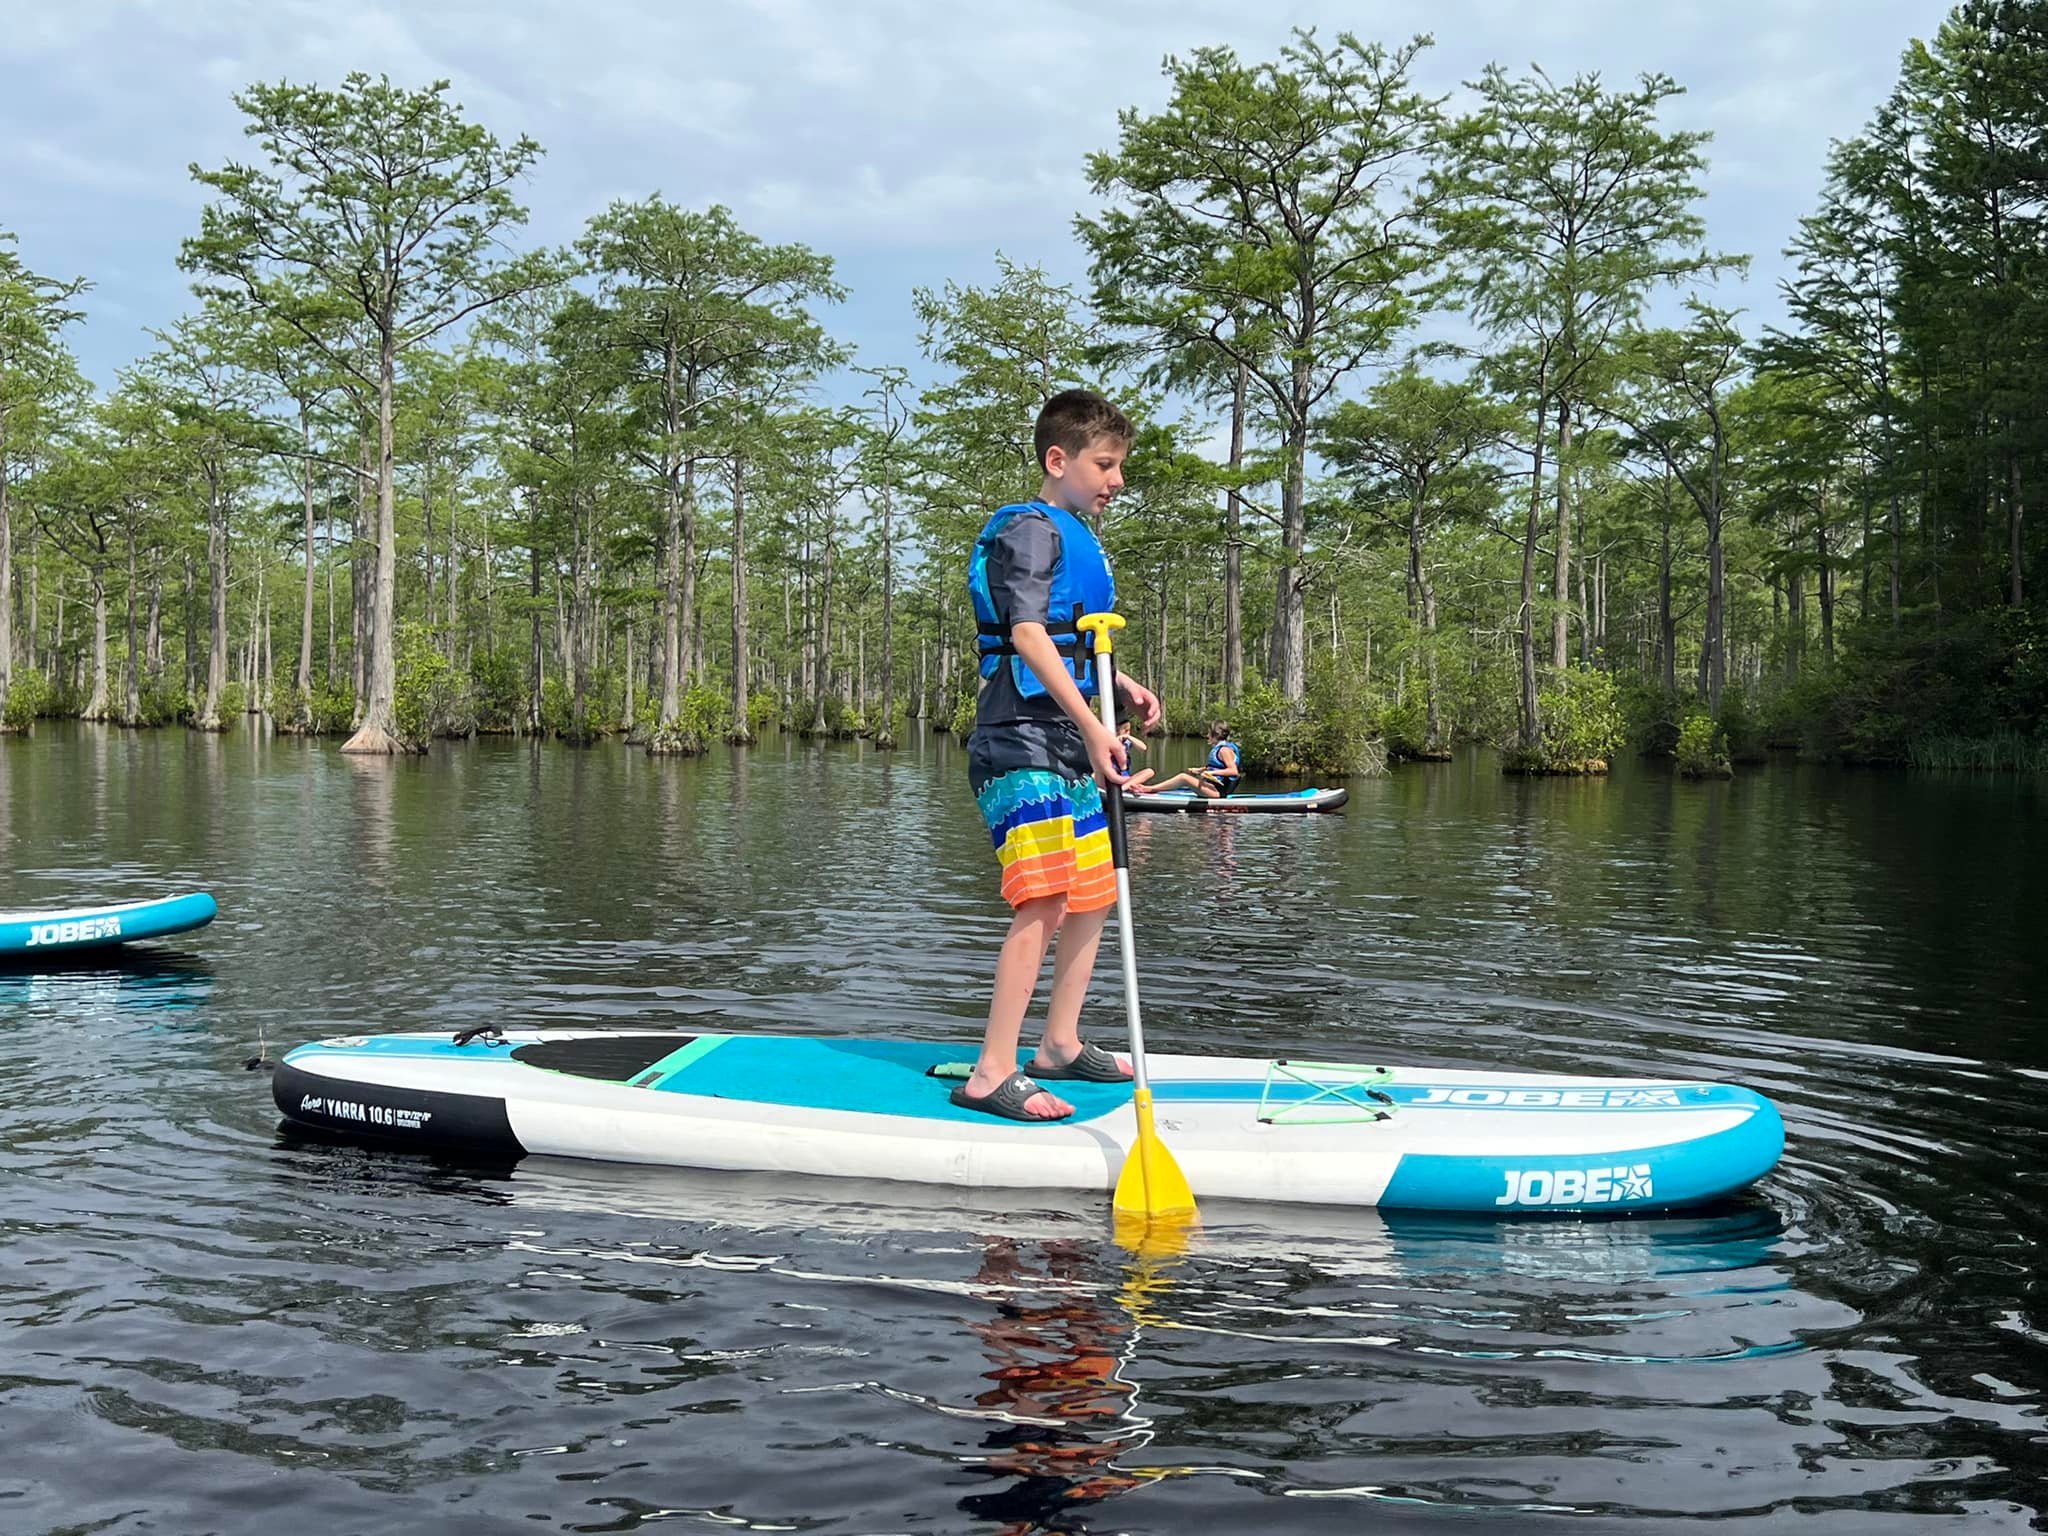 A man made lake with swimming area, aqua park, canoes, stand up paddleboards, and kayaks. Lake Safety: Every guest, at any swimming level, is required to wear a life jacket at all times. Note: beach towels are not provided.